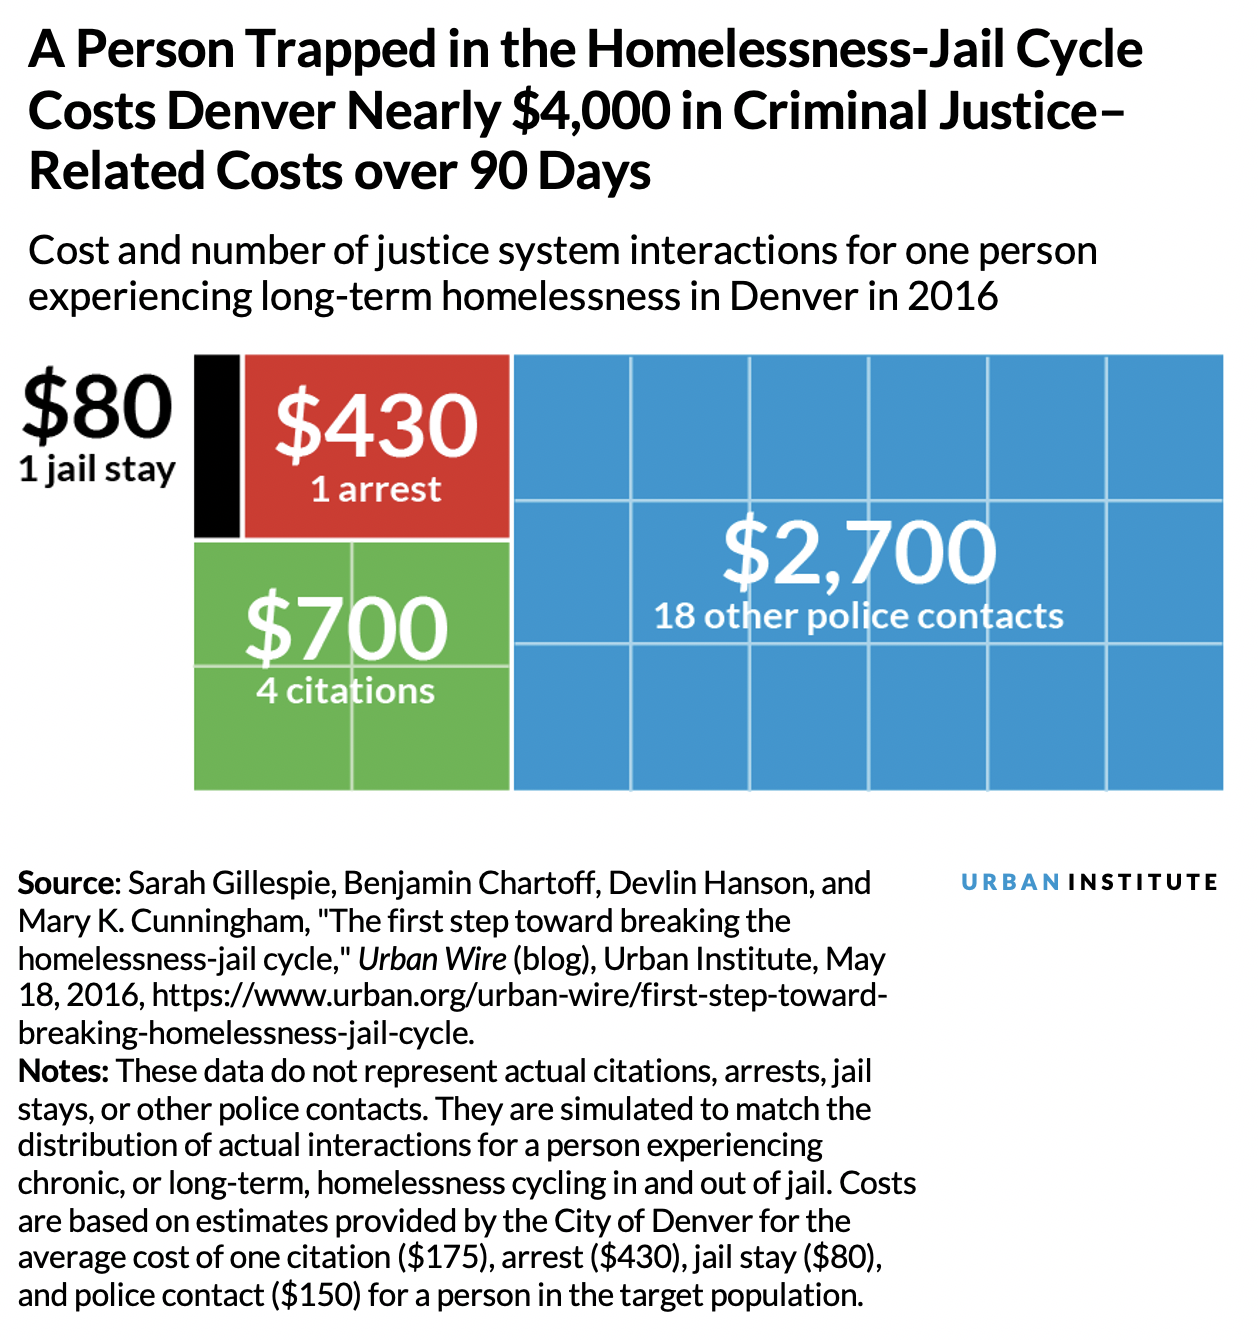 A Person Trapped in the Homlessness-Jail Cycle Cost Denver Nearly $4,000 in Criminal Justice-Related Costs over 90 Days